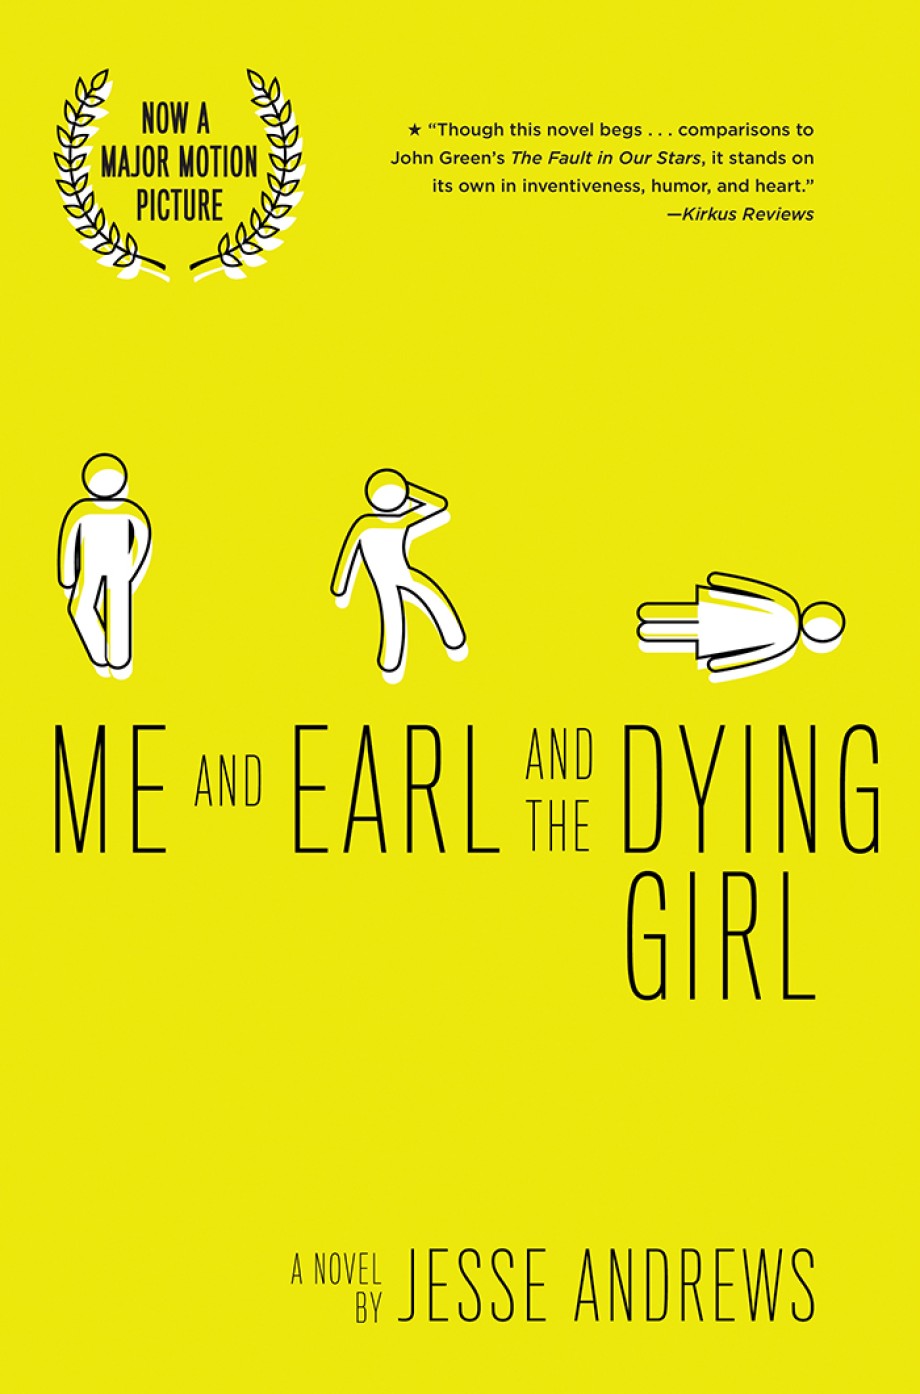 Book cover of Me and Earl and the Dying Girl.